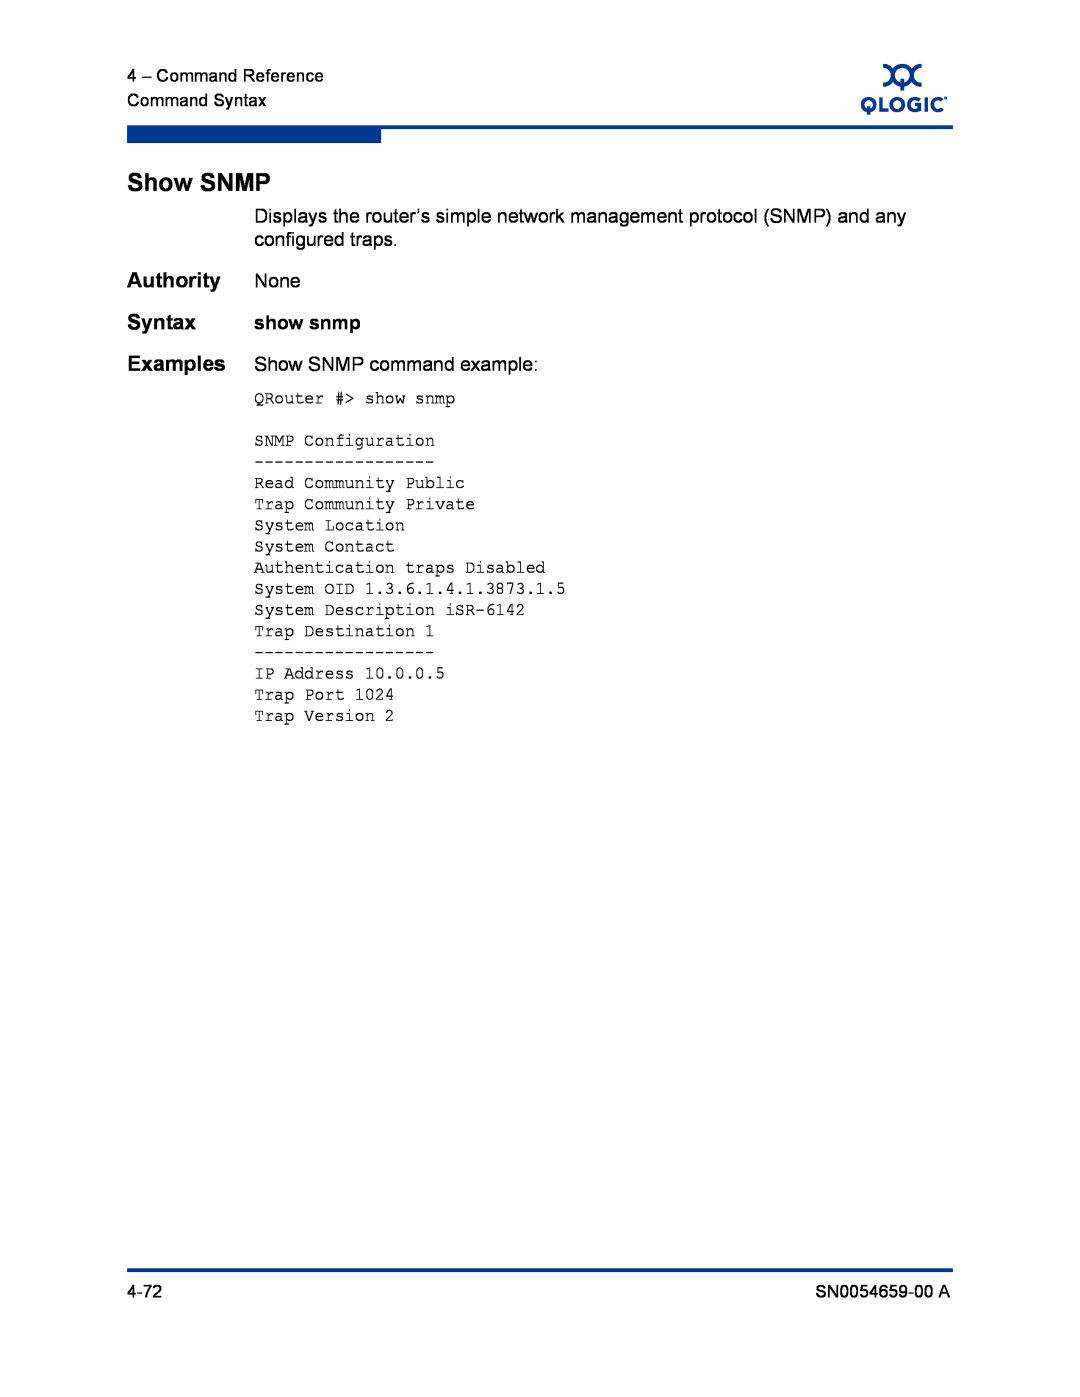 Q-Logic ISR6142 manual Show SNMP, Authority None, Syntax, show snmp 